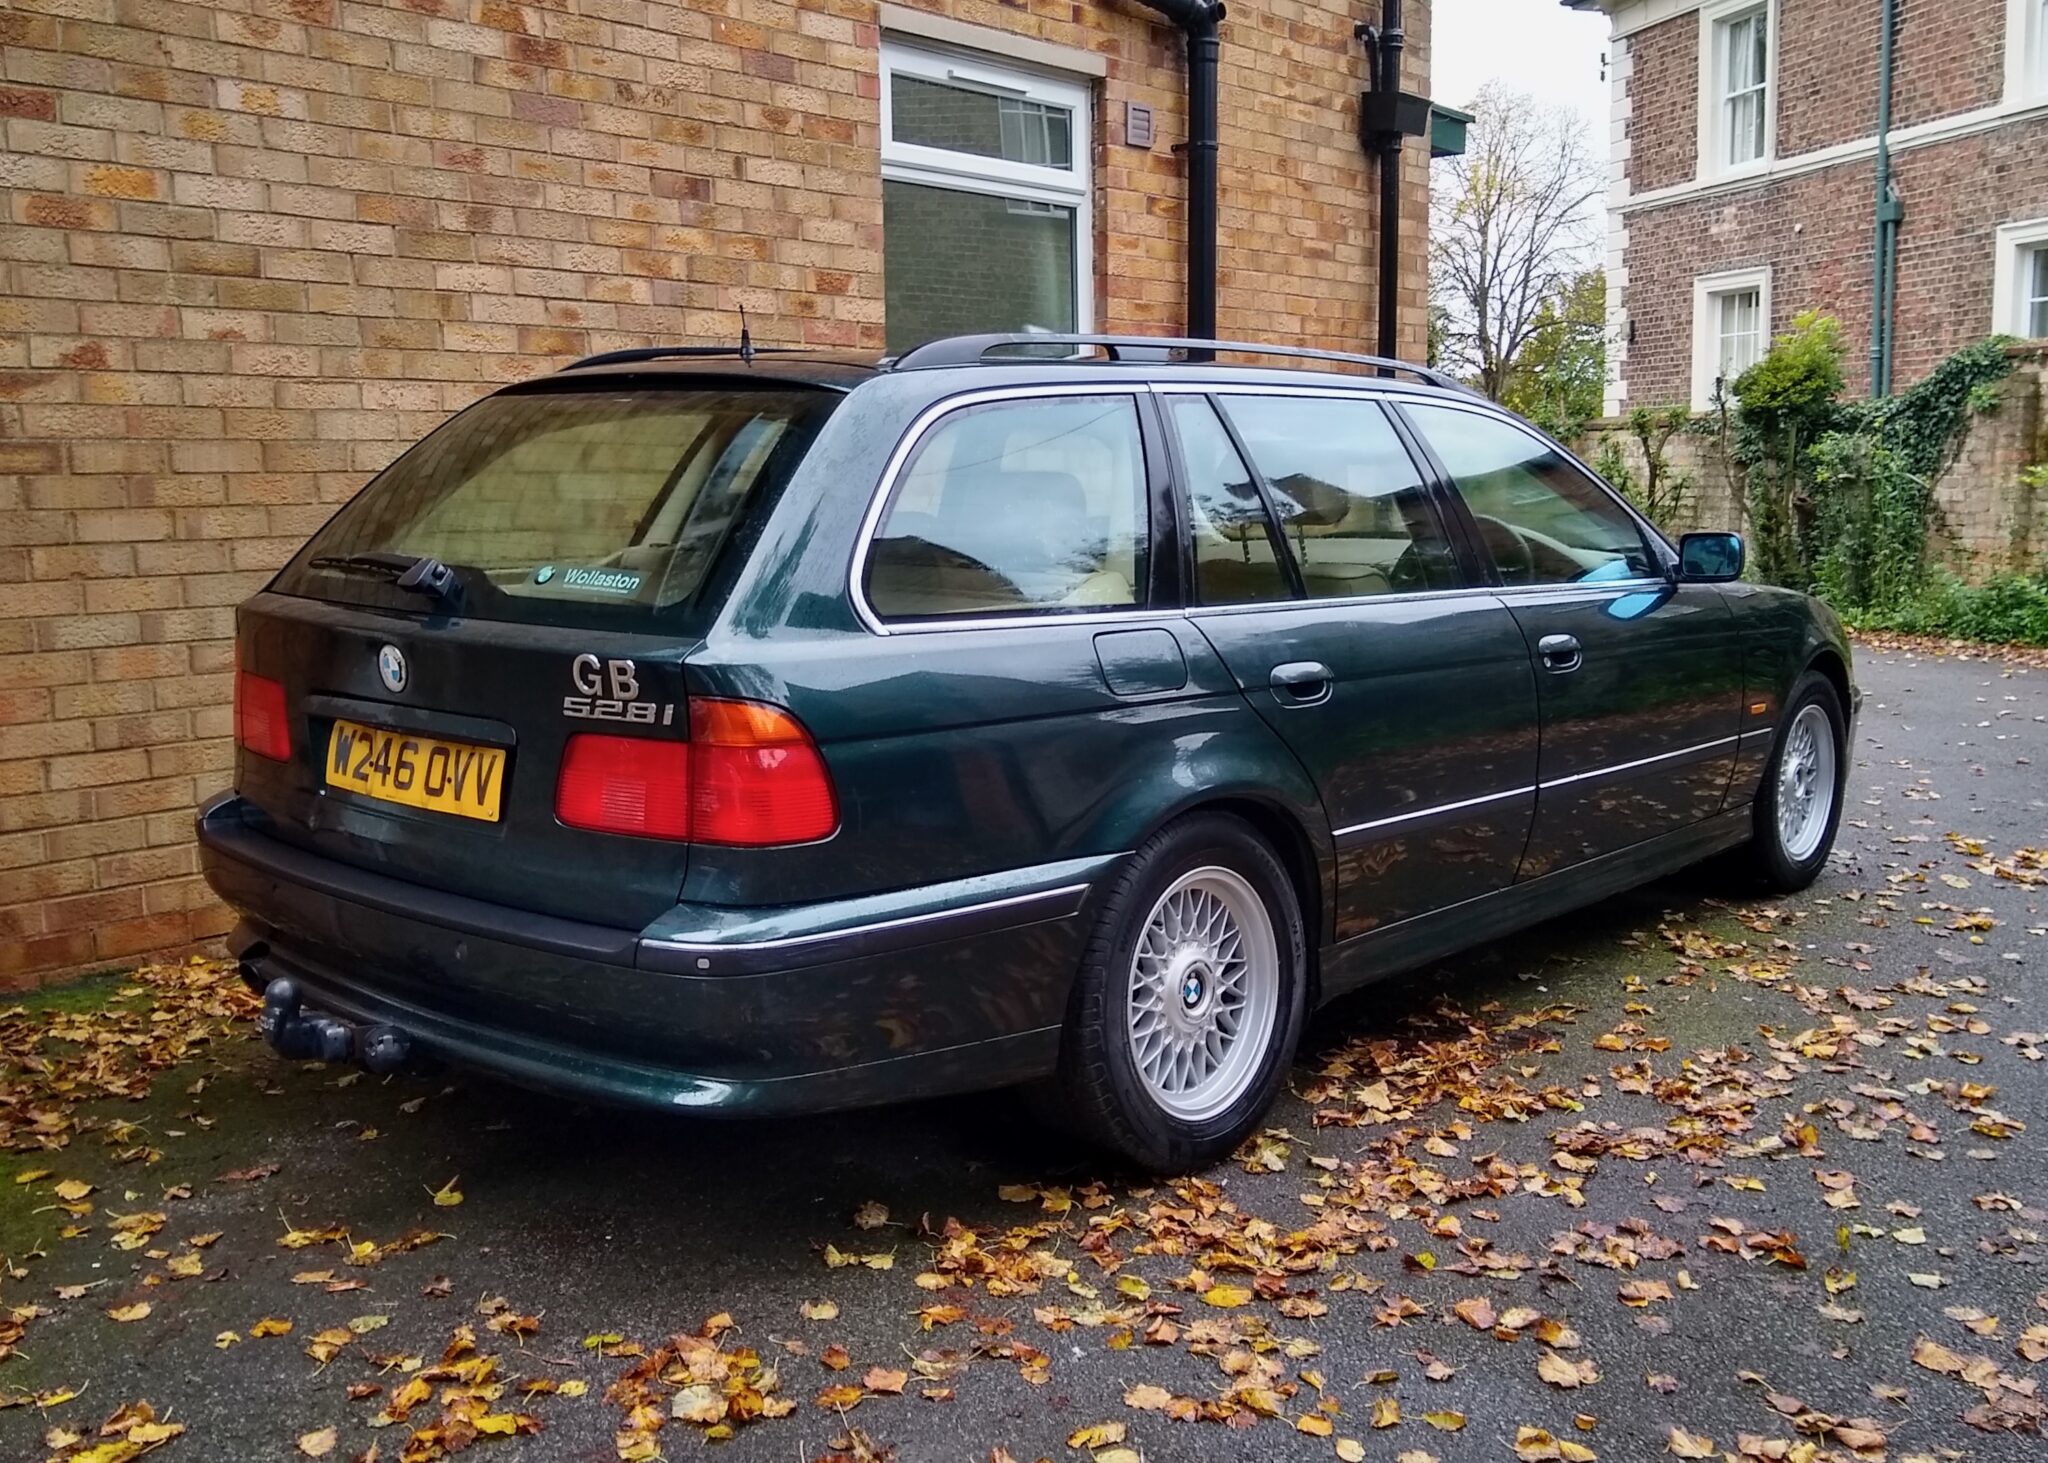 BMW, E39, BMW E39, BMW 5 series, BMW 528i, E39 Touring, project car, classic car, new car, Not 2 Grand, N2G, Not2Grand, not2grand.co.uk